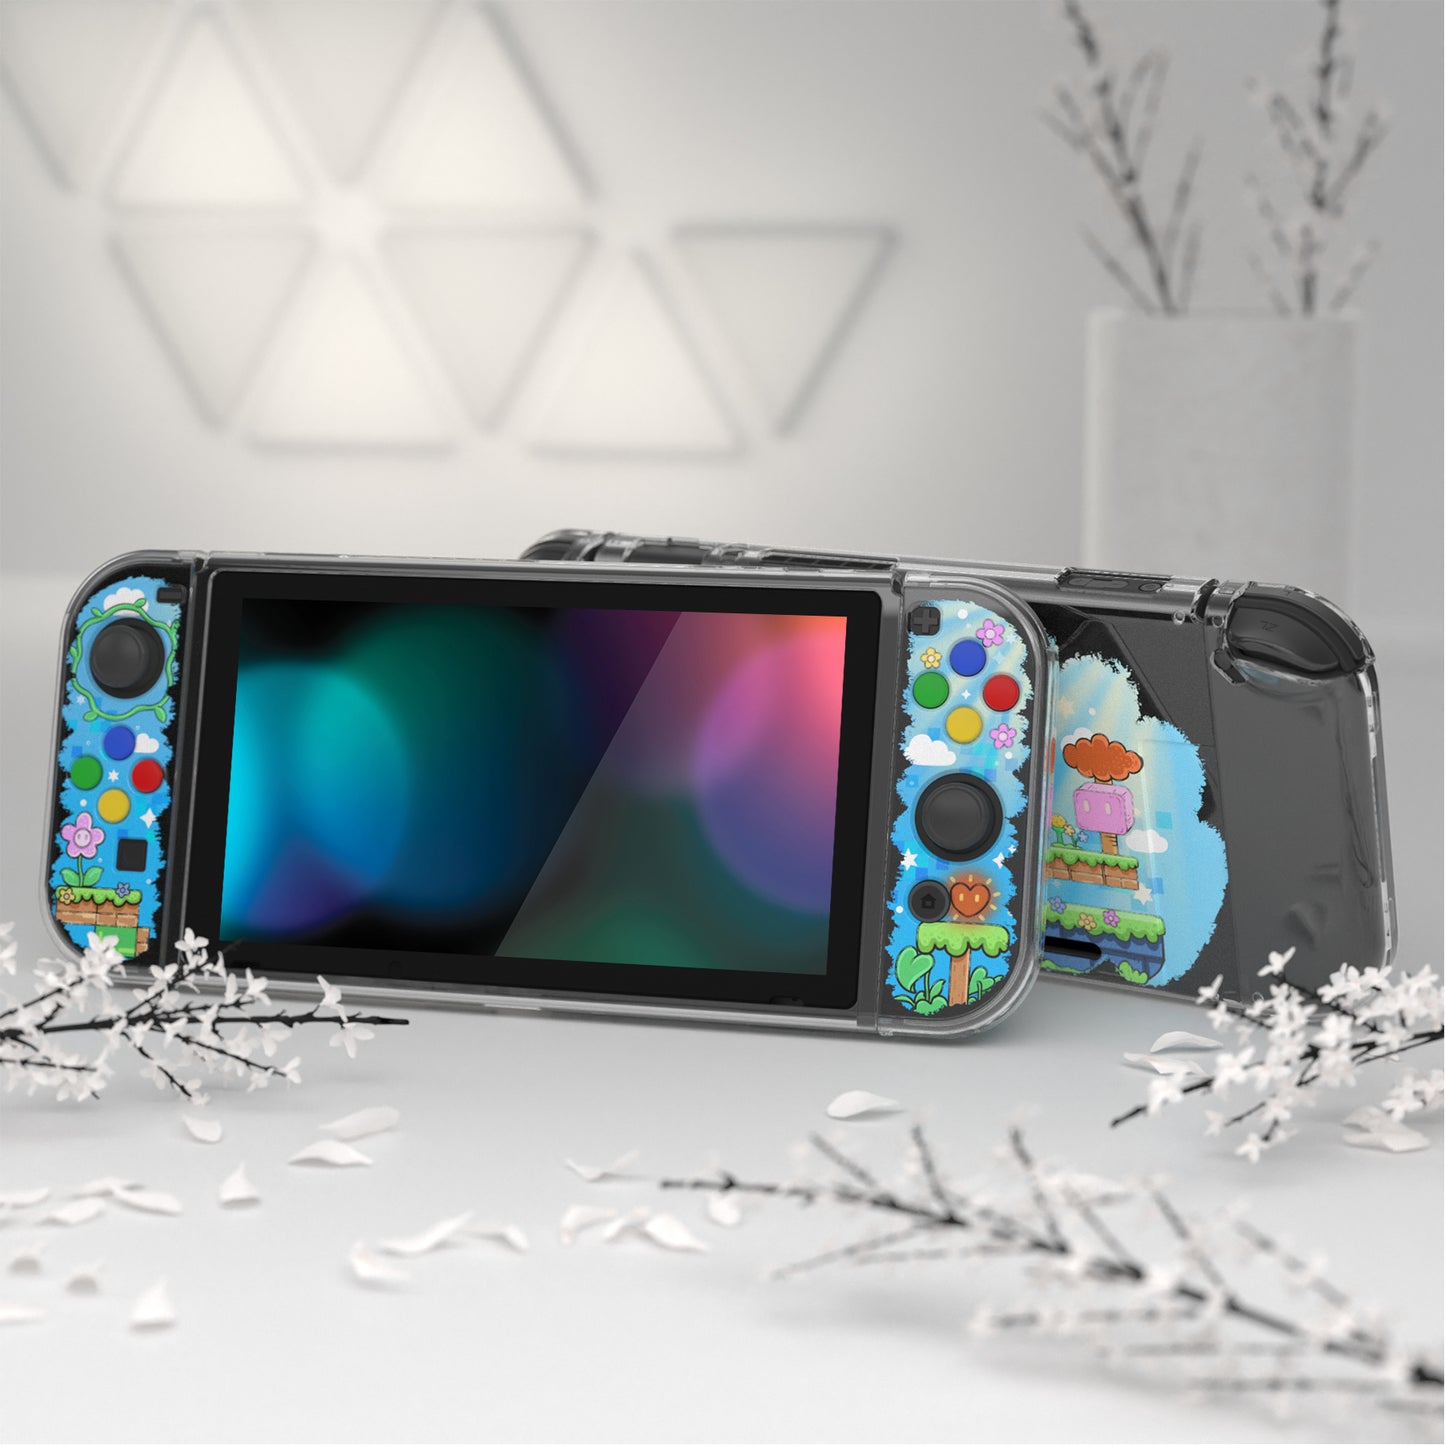 PlayVital Blocks Adventure Protective Case for NS, Soft TPU Slim Case Cover for NS Joycon Console with Colorful ABXY Direction Button Caps - NTU6041G2 PlayVital